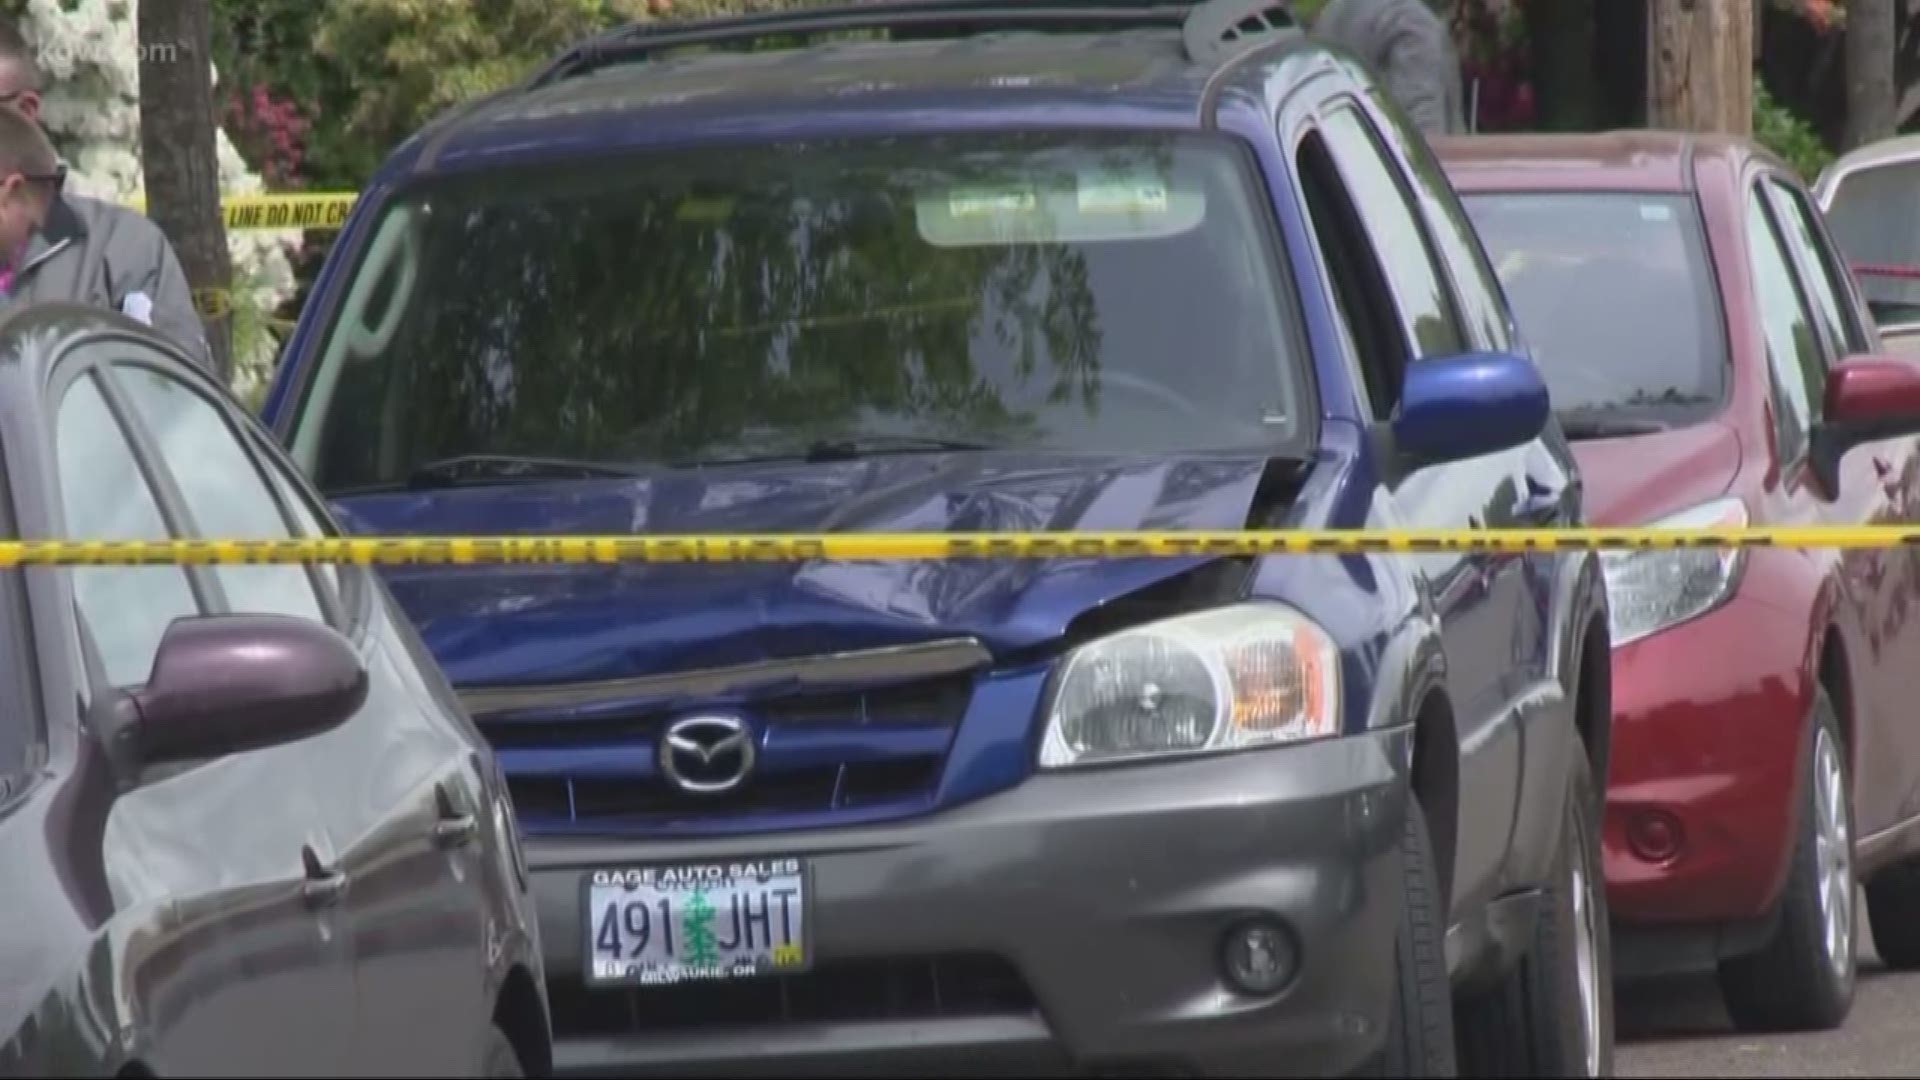 The car in the PSU hit-and-run was recently purchased from the family of a PSU student.